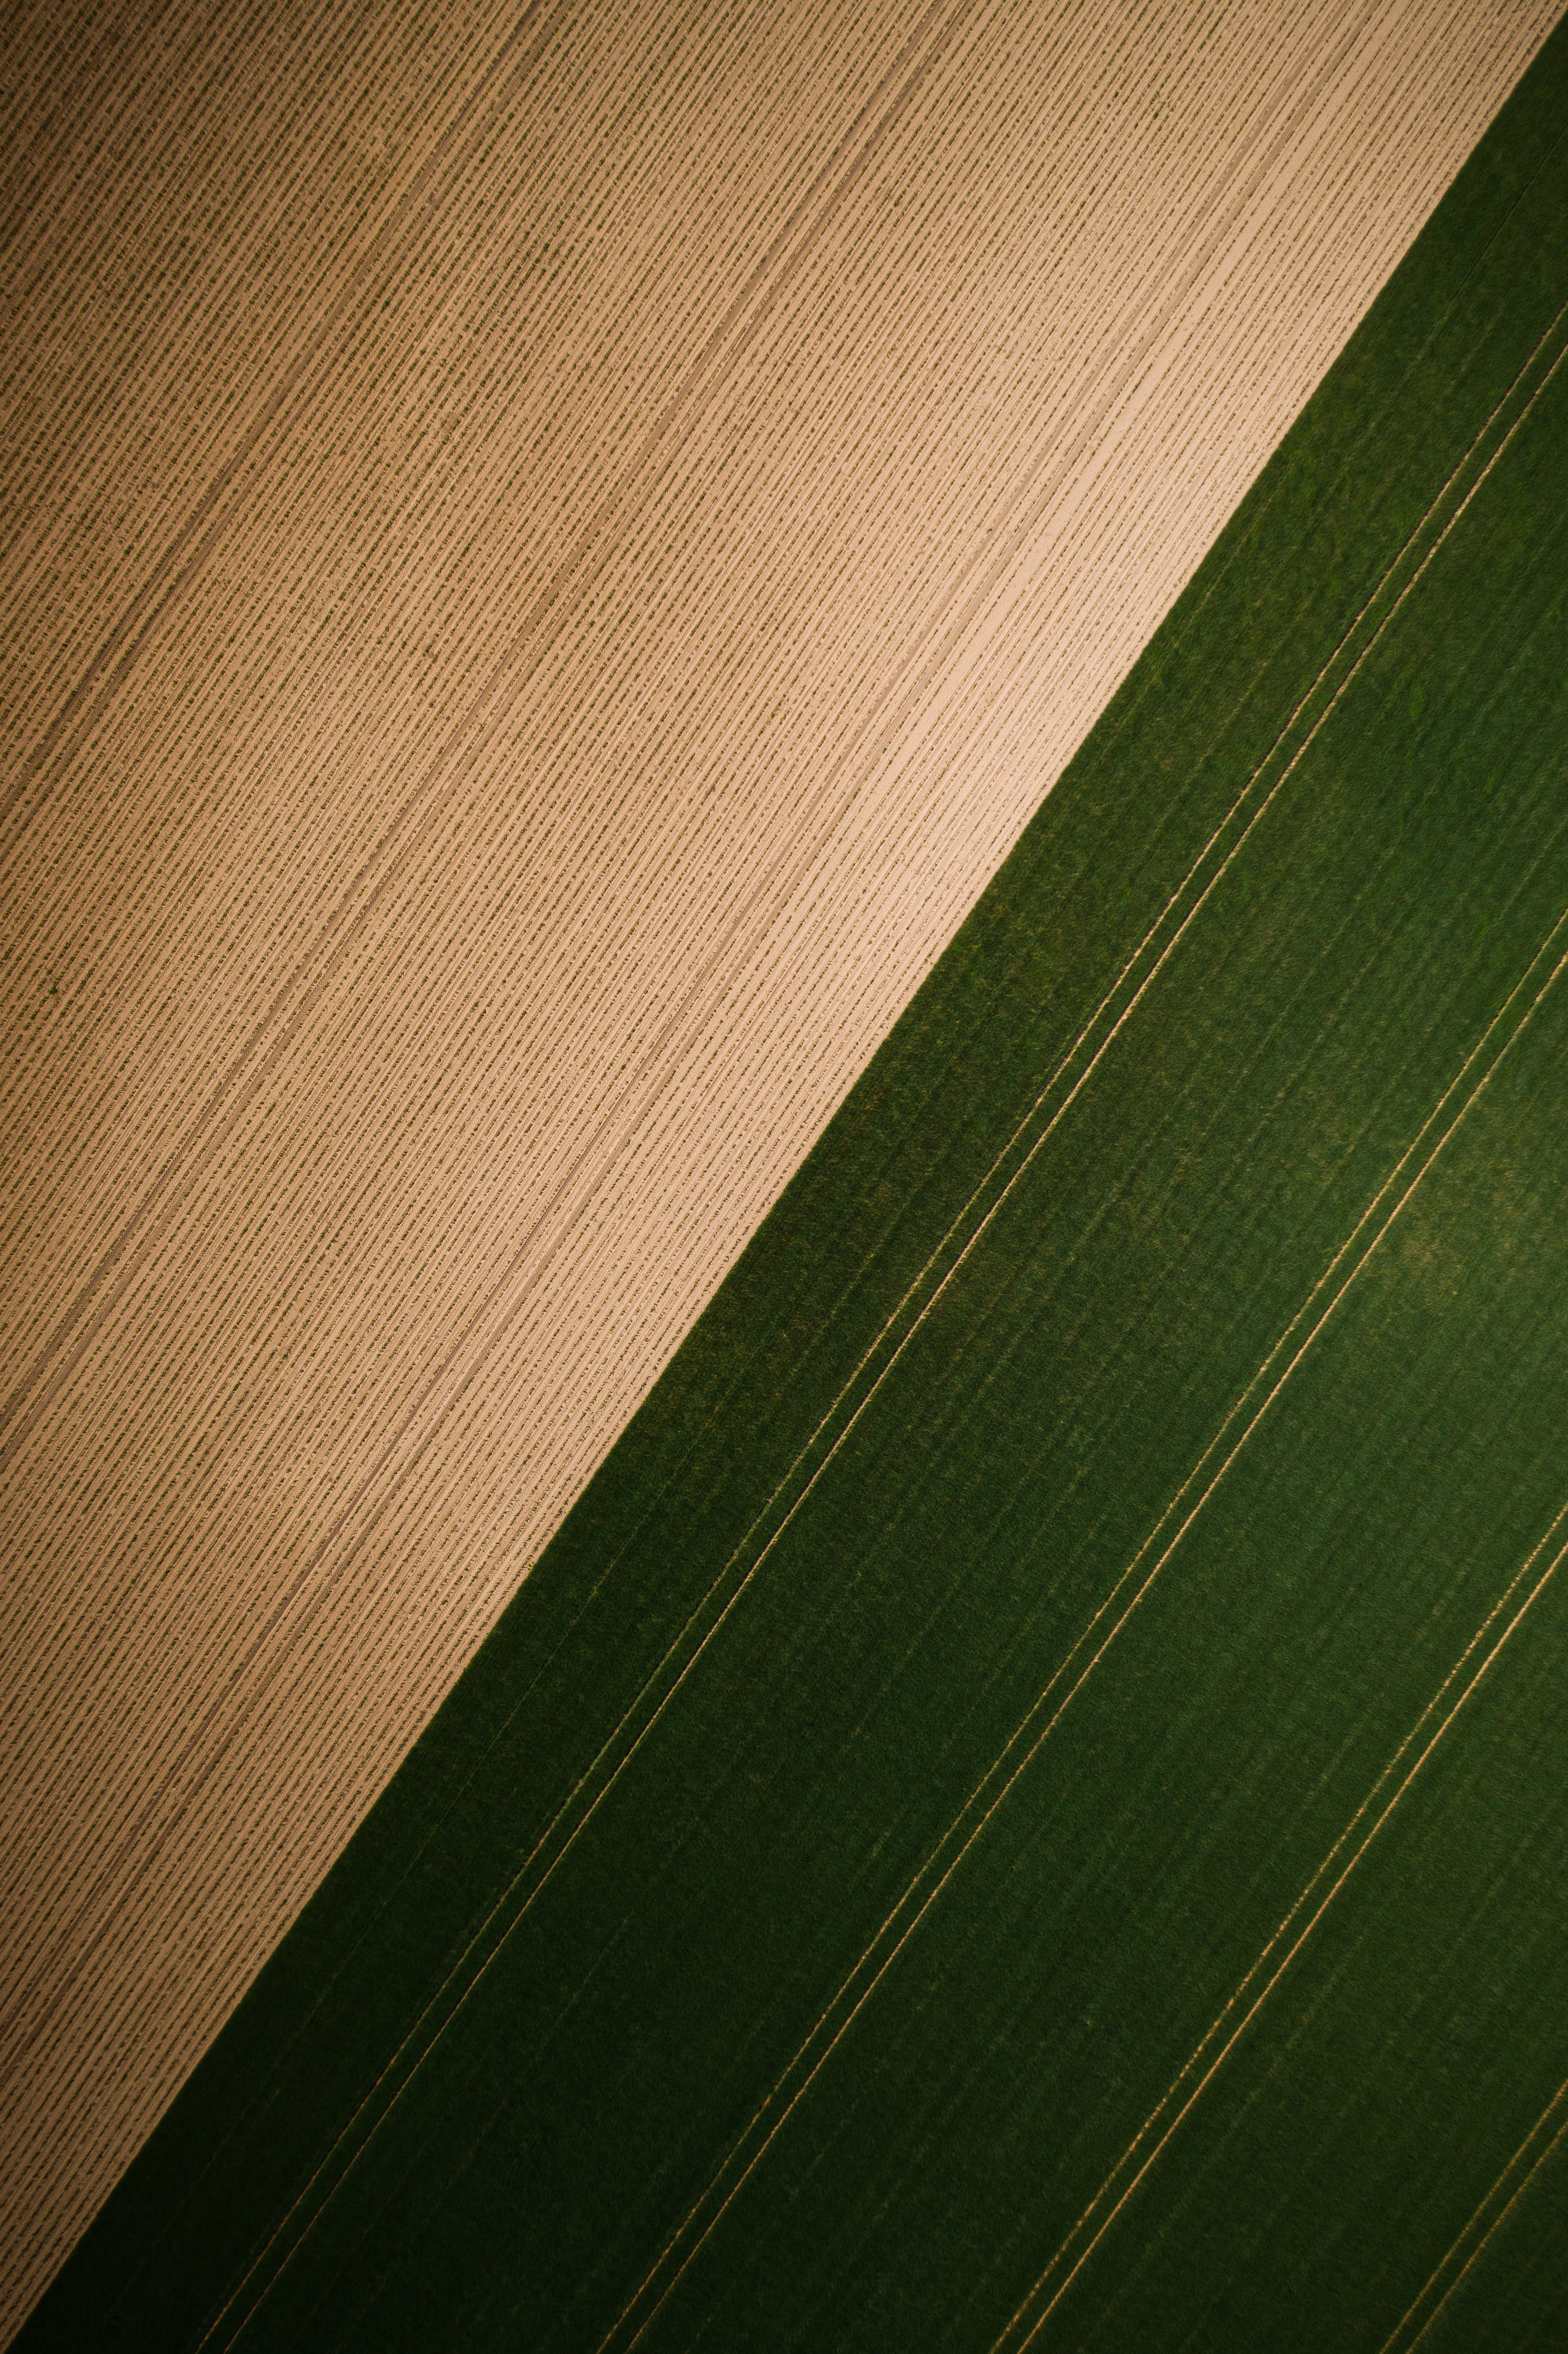 stripes, grass, view from above, texture, textures, field, streaks 8K